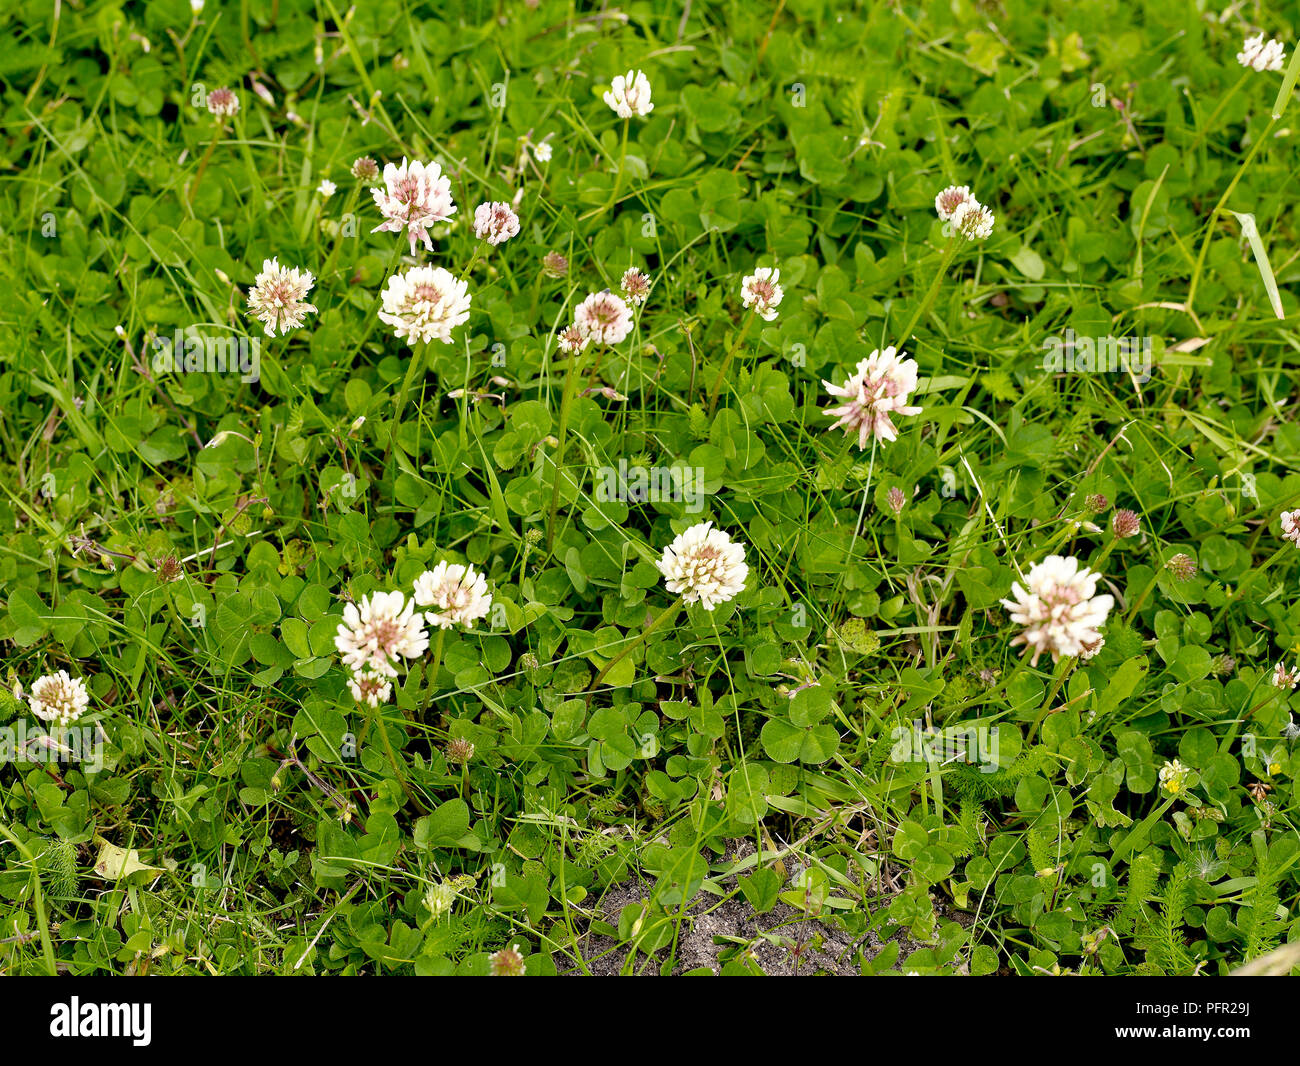 Trifolium repens (White clover), white flowers among masses of small green leaves Stock Photo